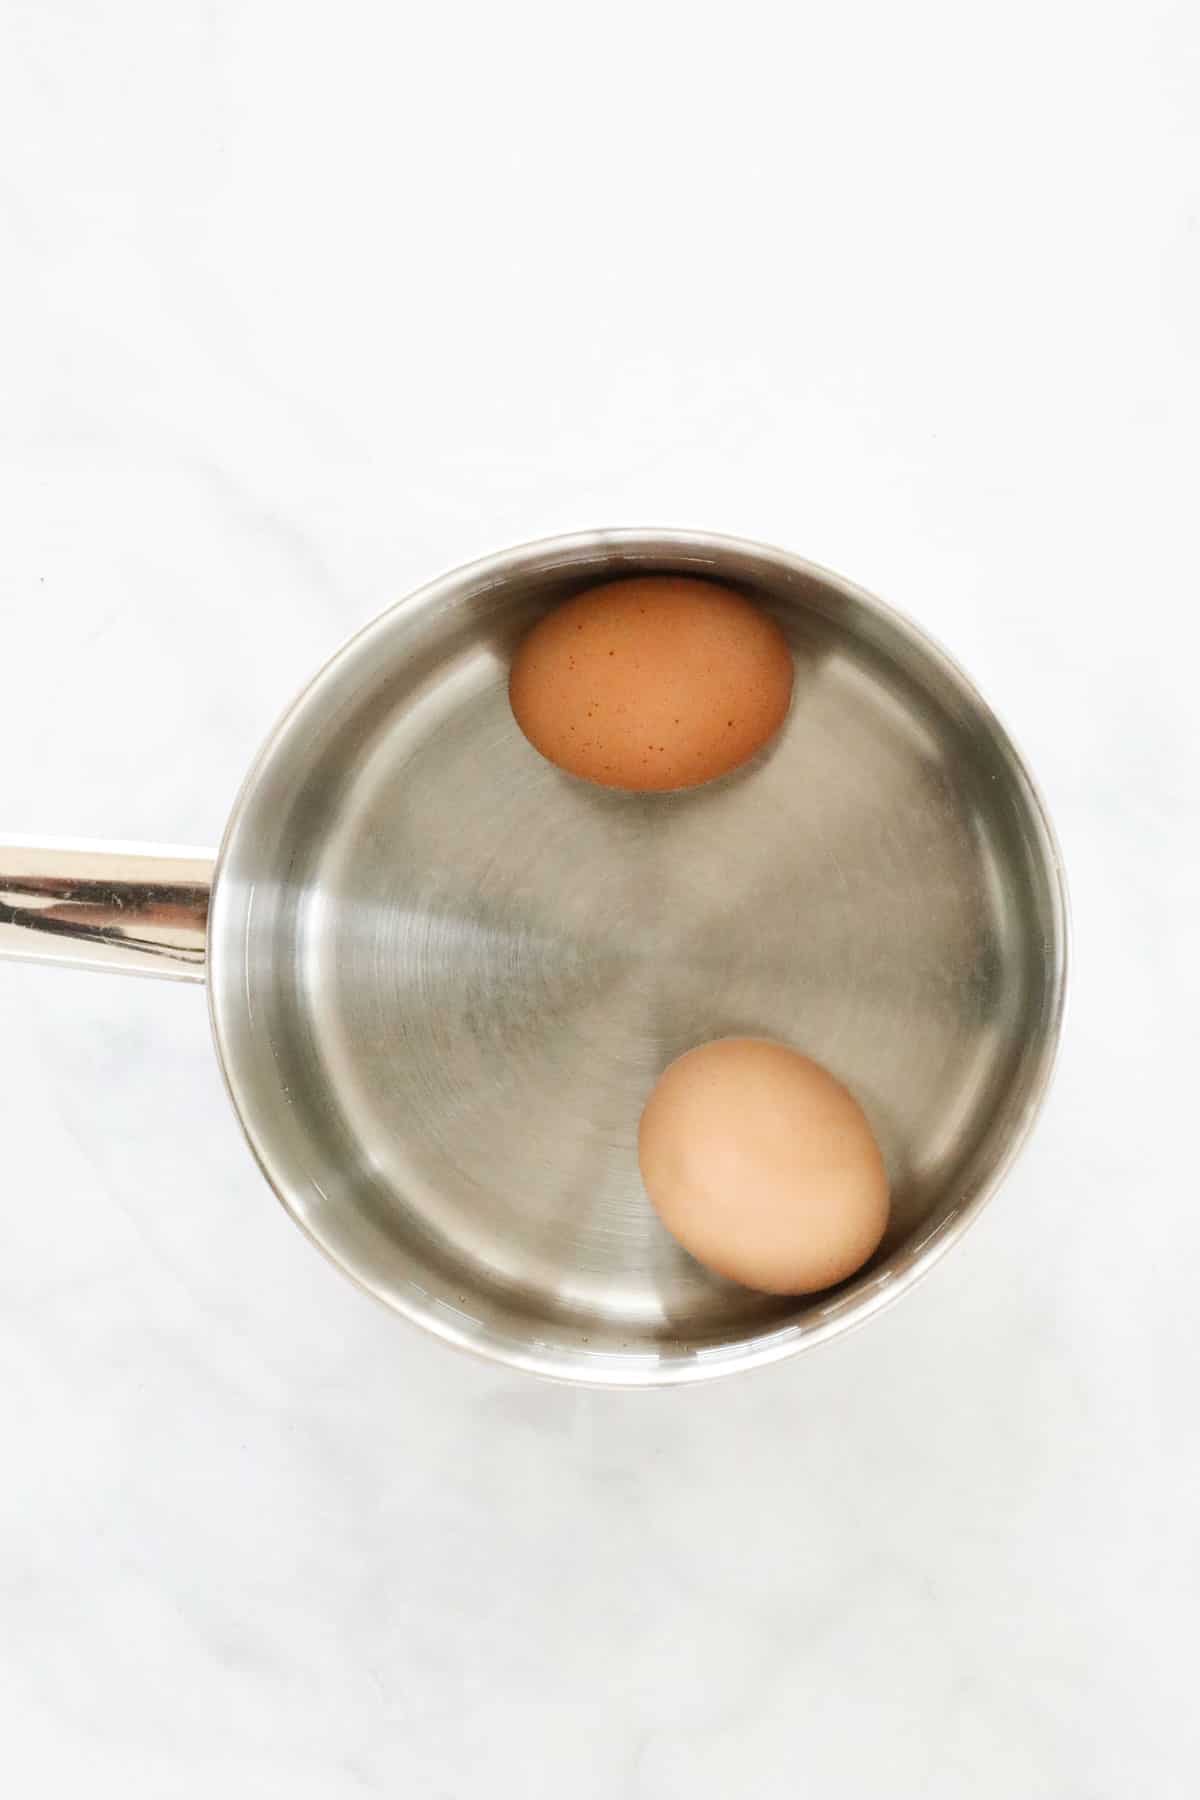 Two eggs in a saucepan.